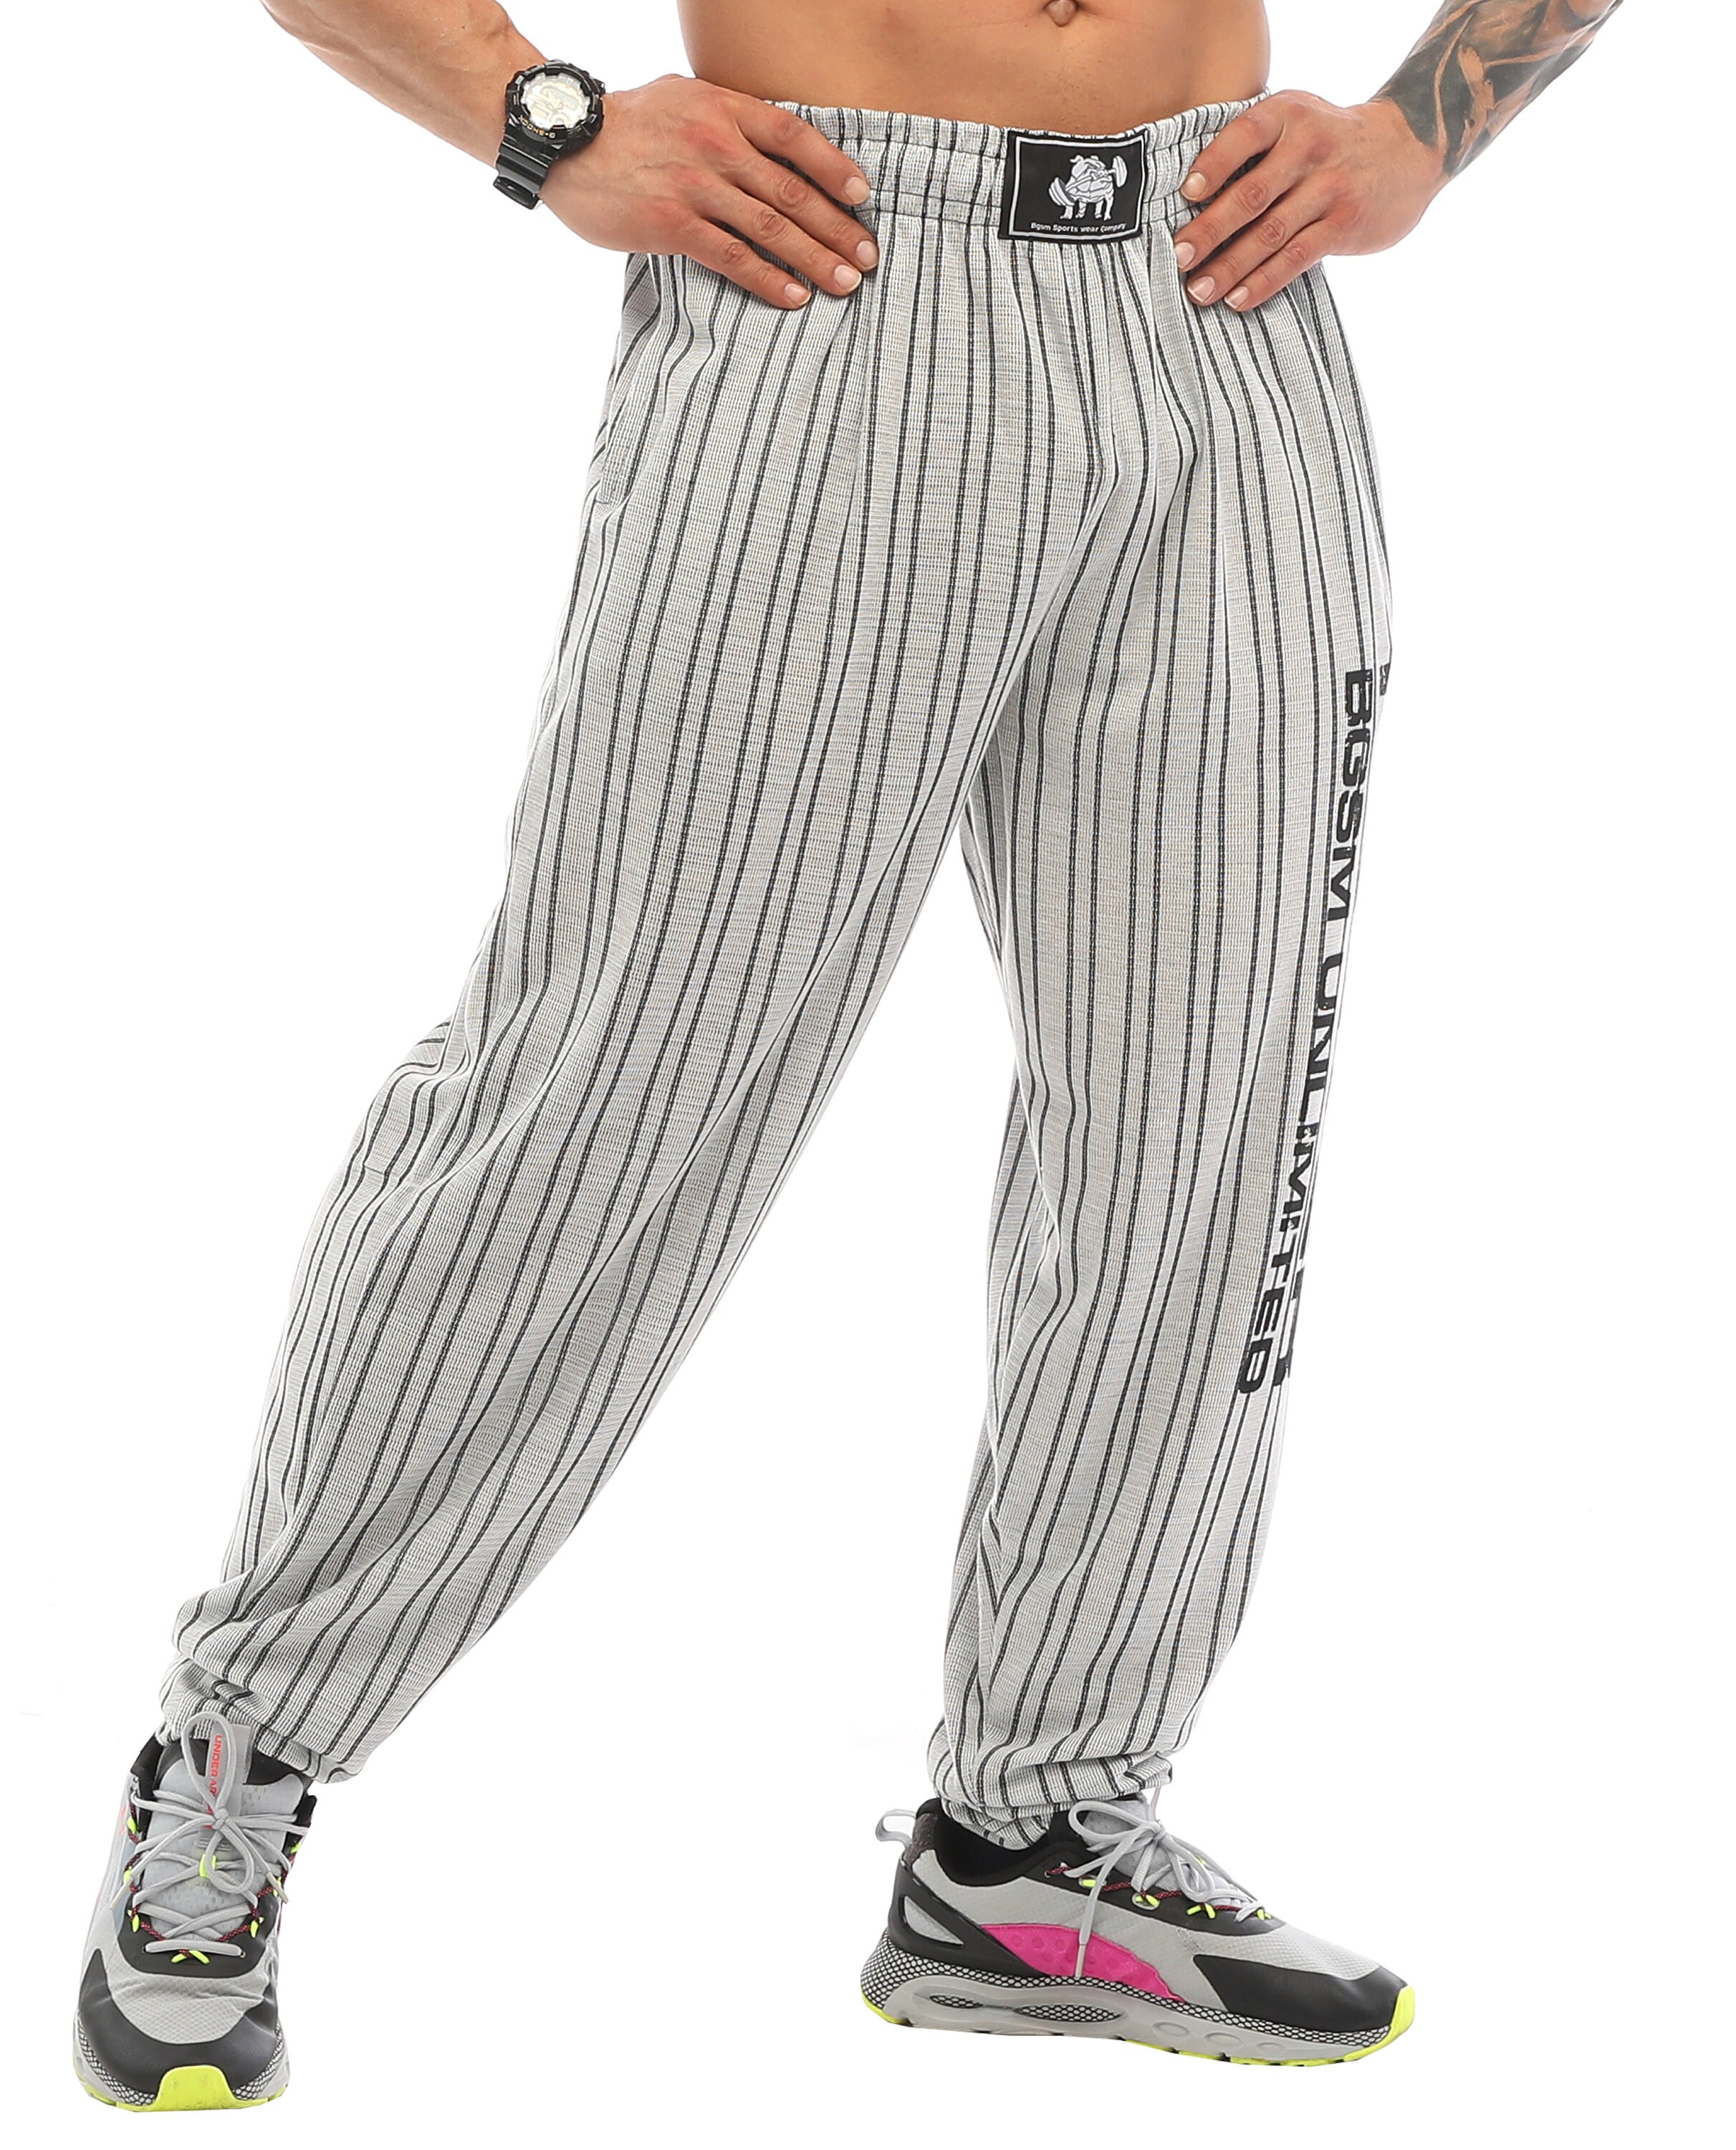 Men's Baggy Sweatpants With Pockets, Oldschool Loose Fit Gym Muscle ...